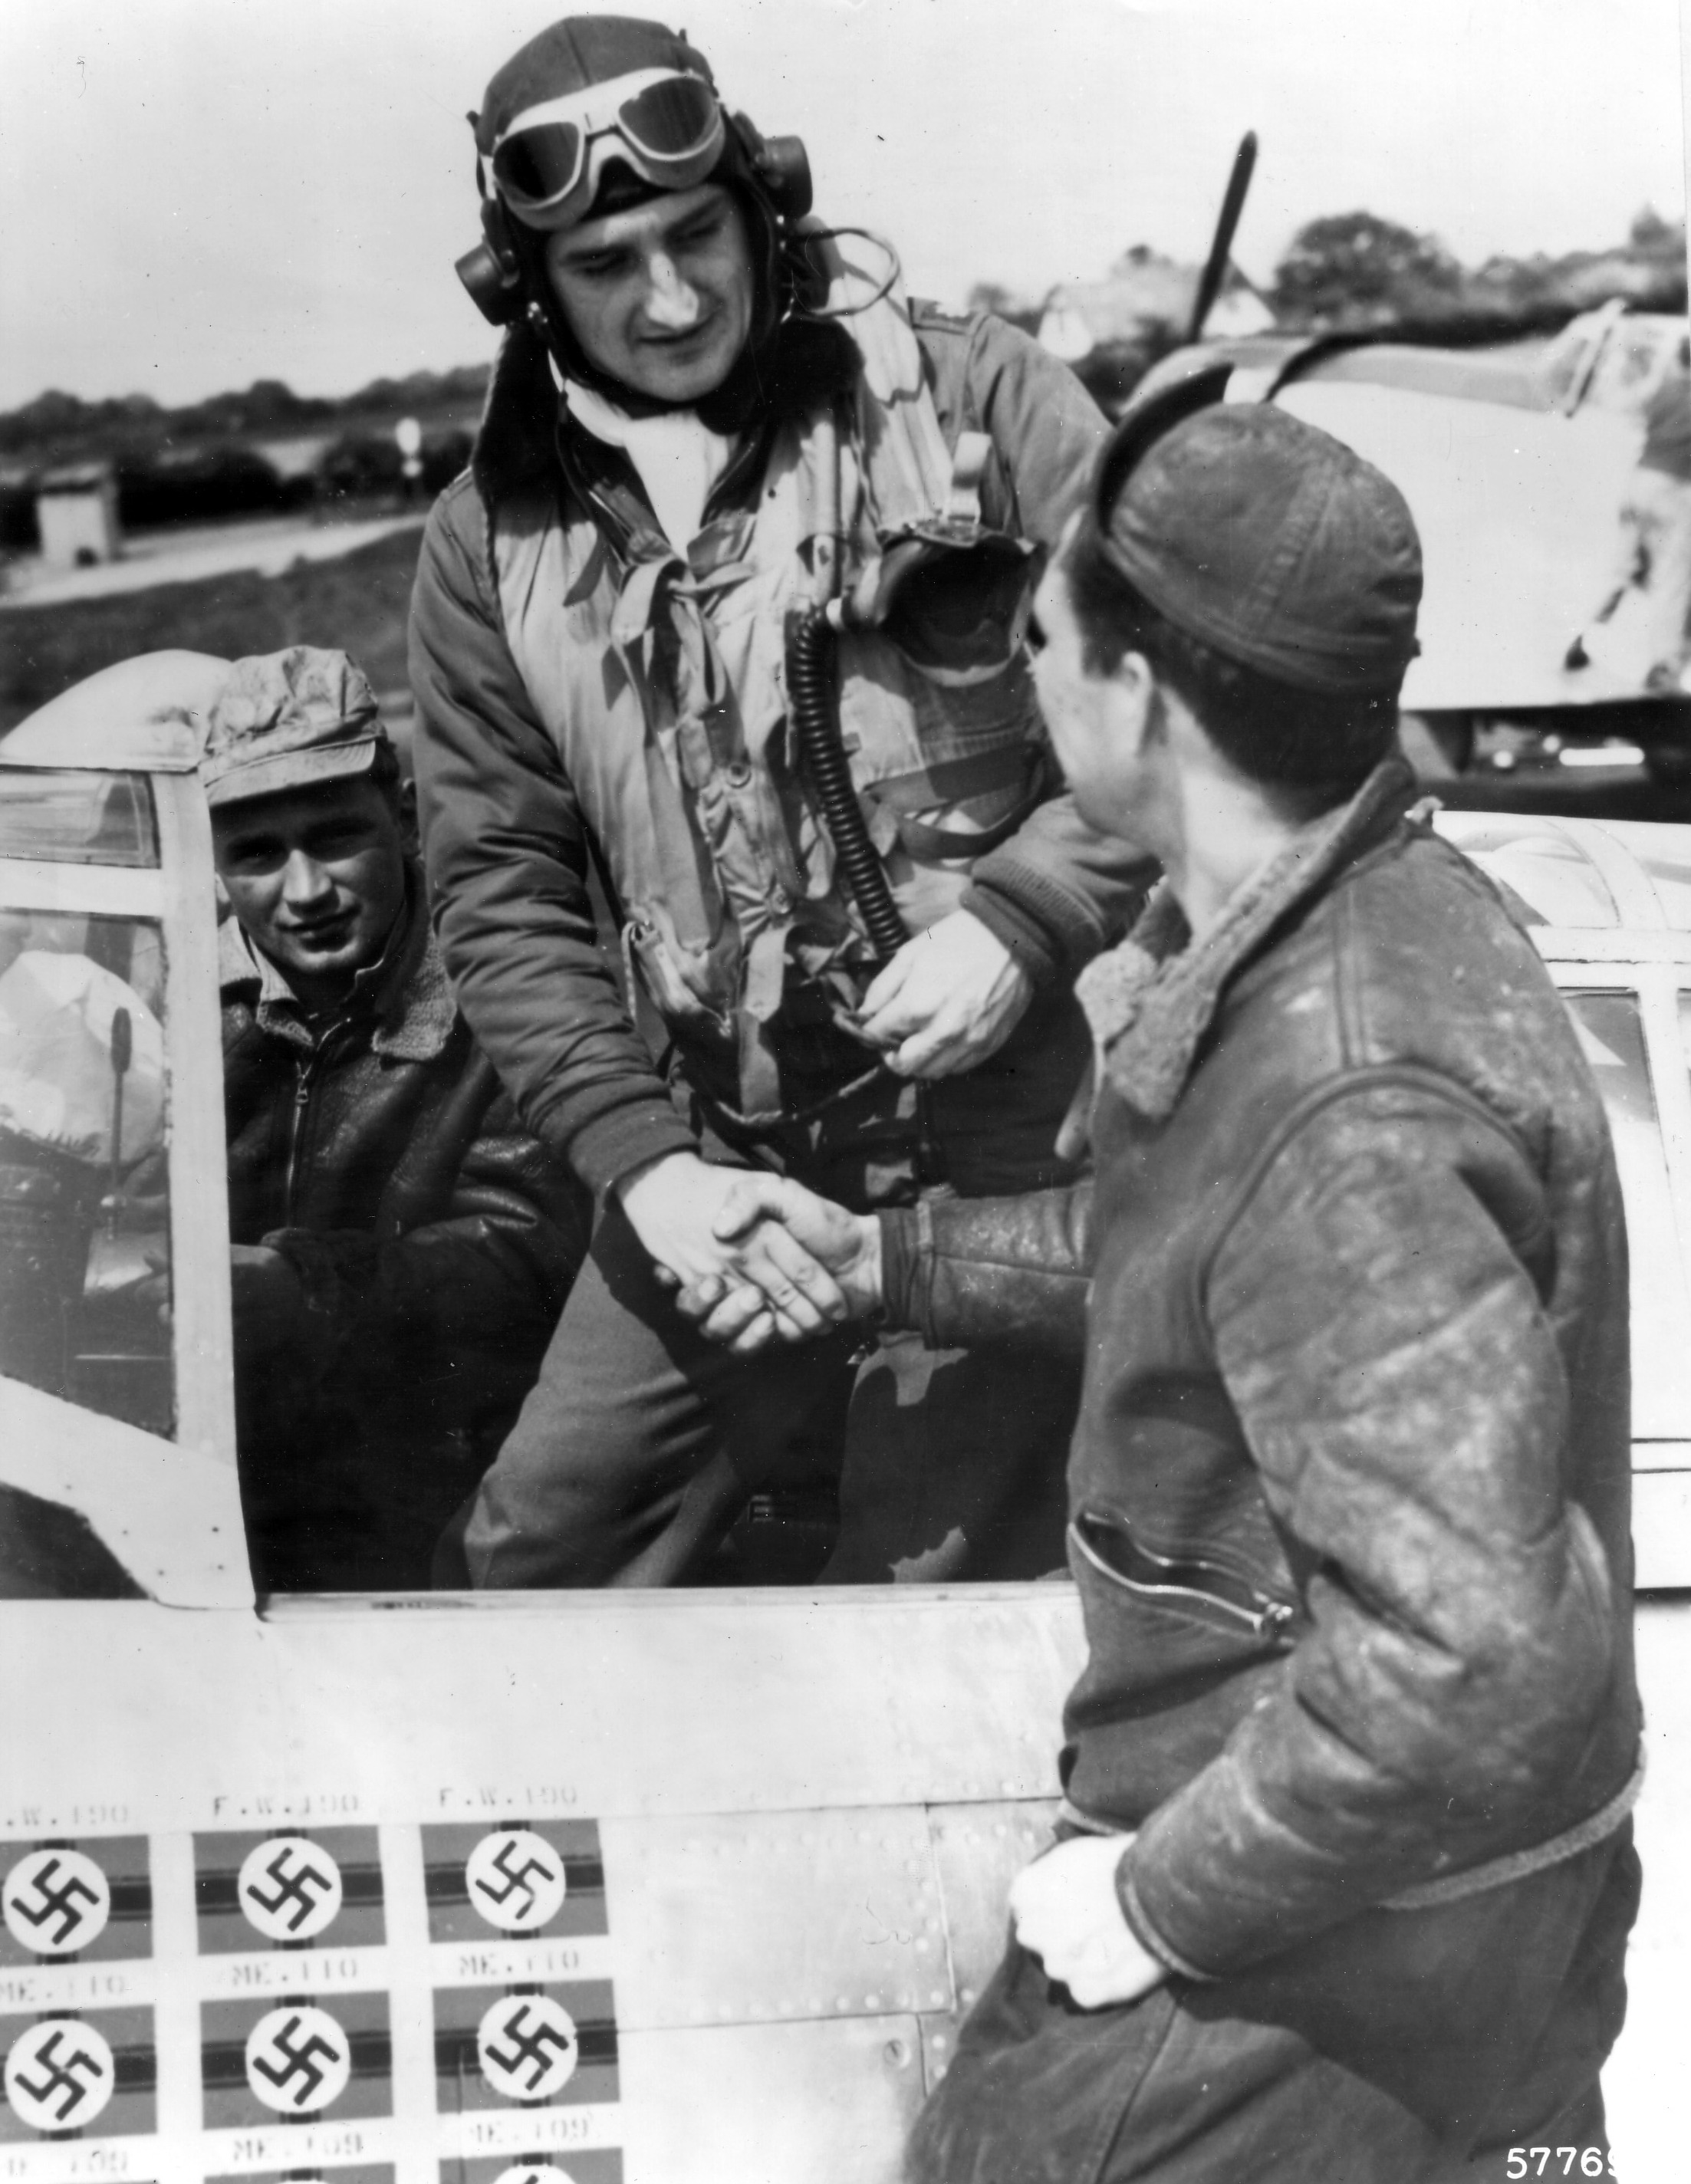 Lieutenant Colonel Francis Gabreski shaking hands with his crew chief Staff Sergeant Ralph Safford and his assistant crew chief Felix Schacki (background) before a mission, Jun 1944